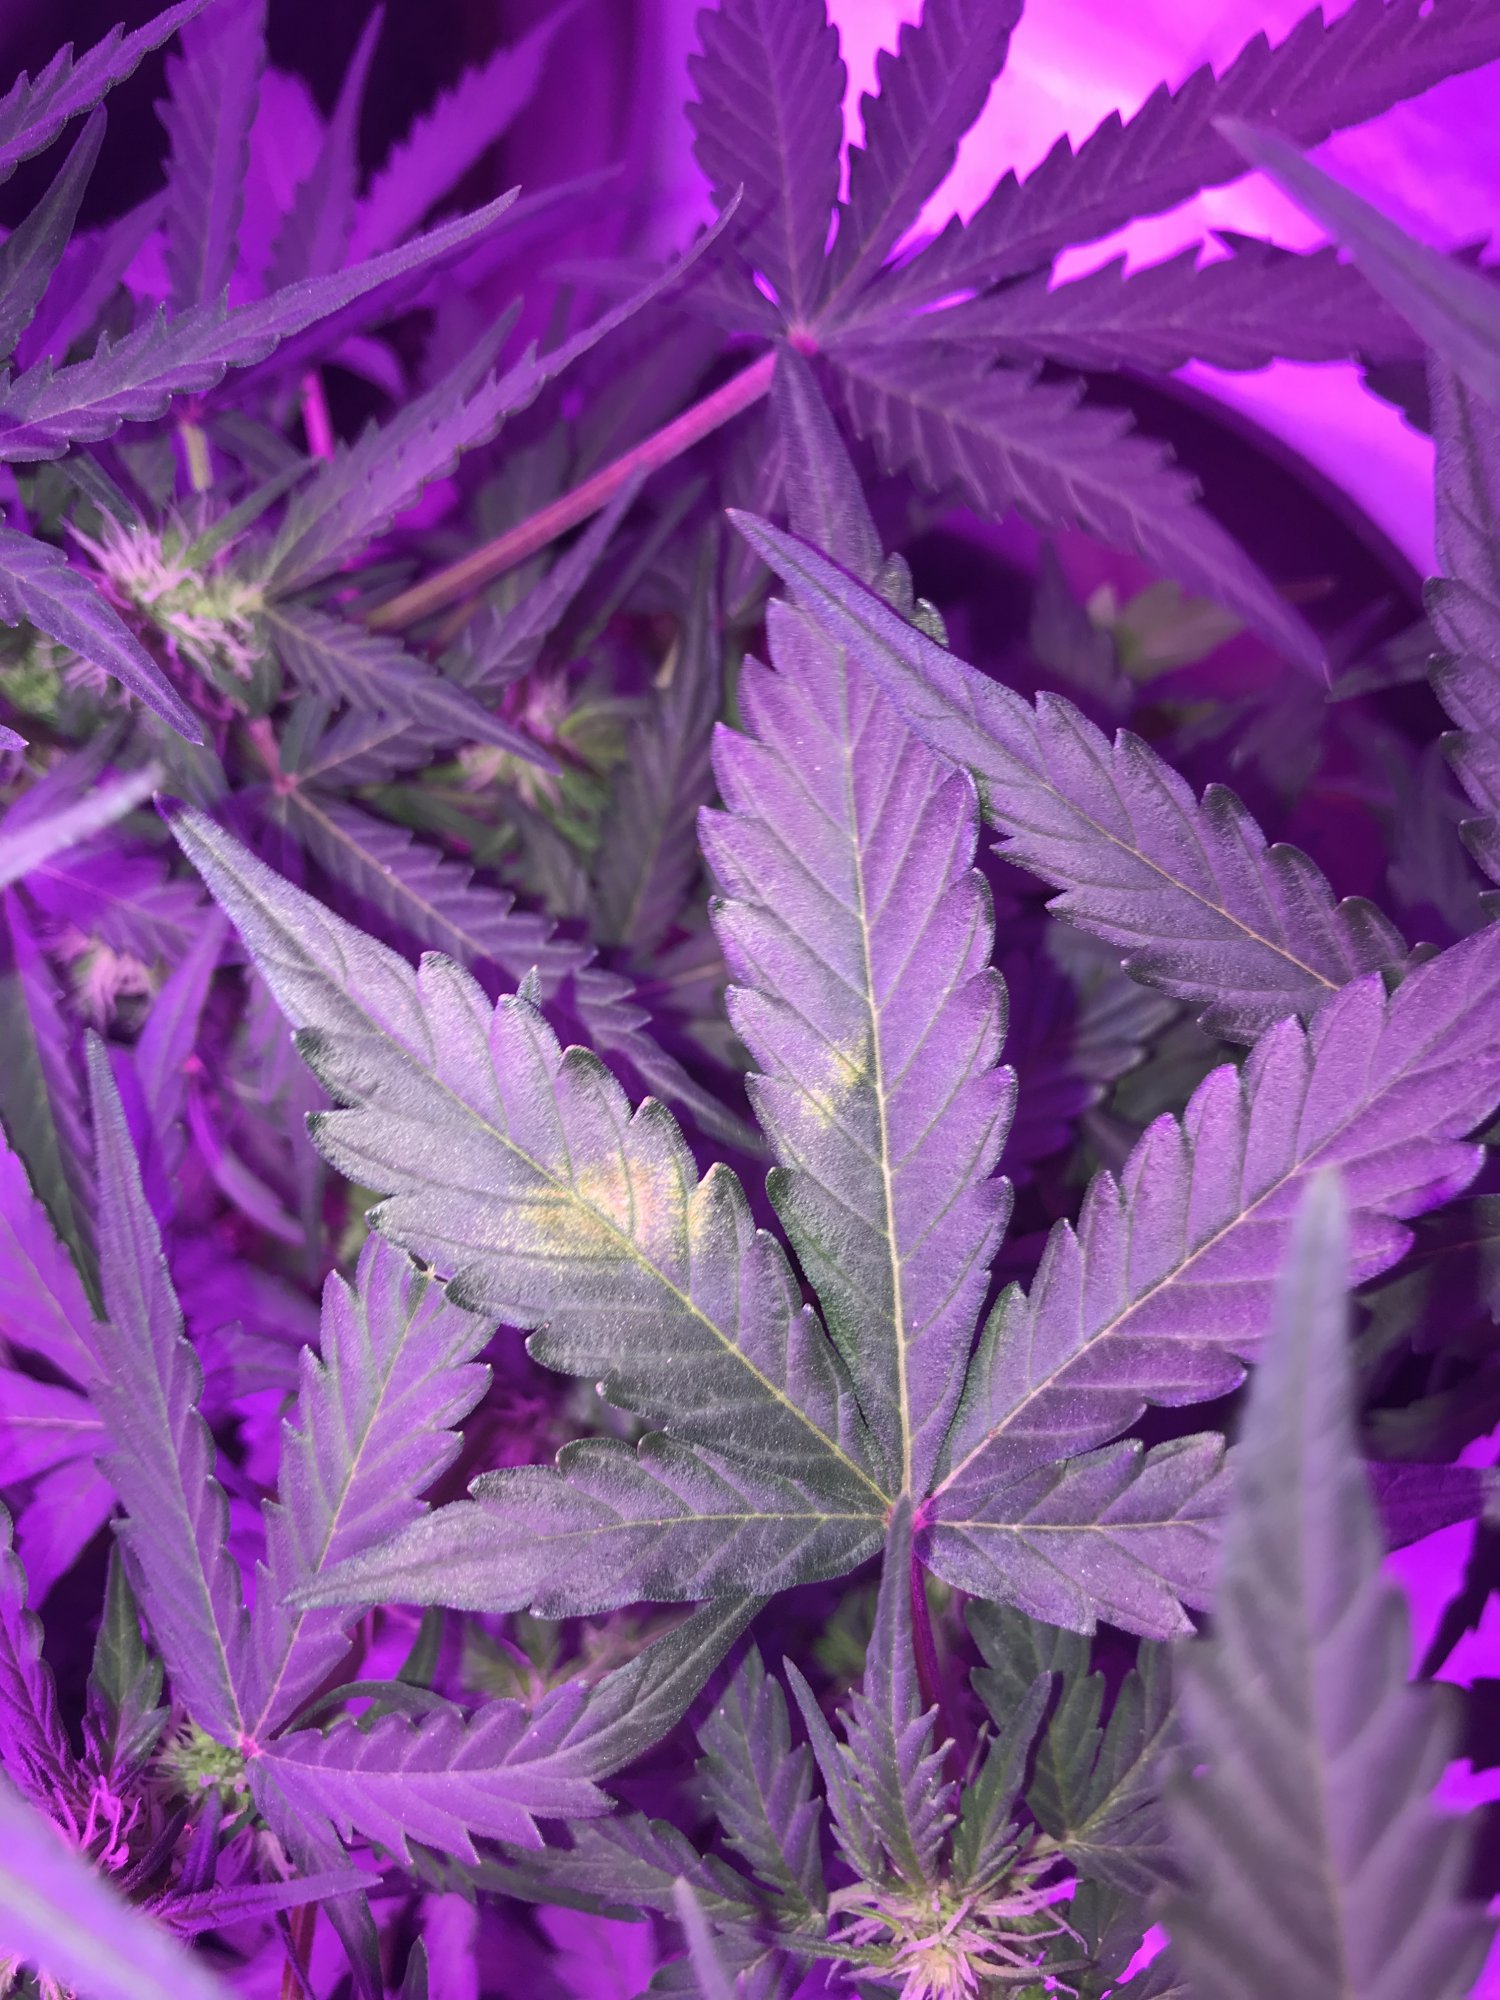 Cant figure out whats causing yellowing on upper leaves